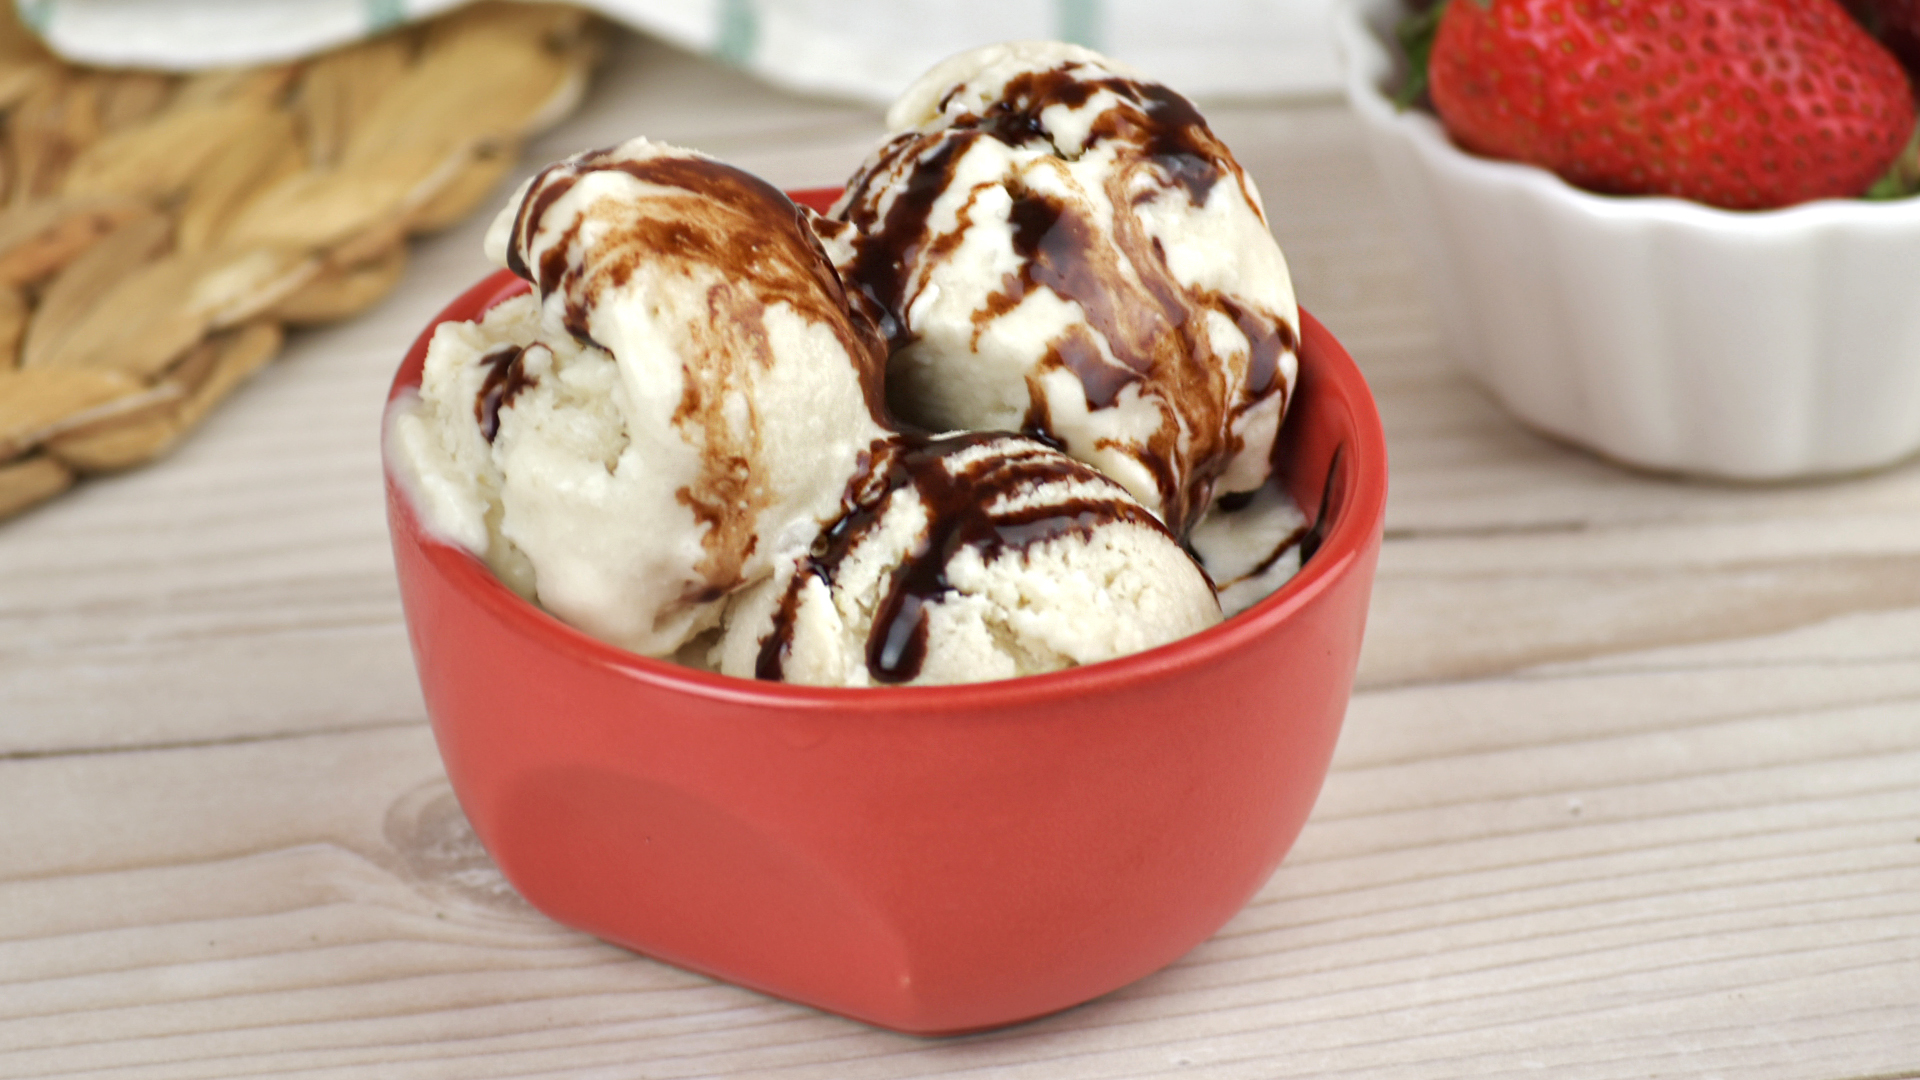 Master The Art Of Making Delicious Homemade Ice Cream With These Simple Tips